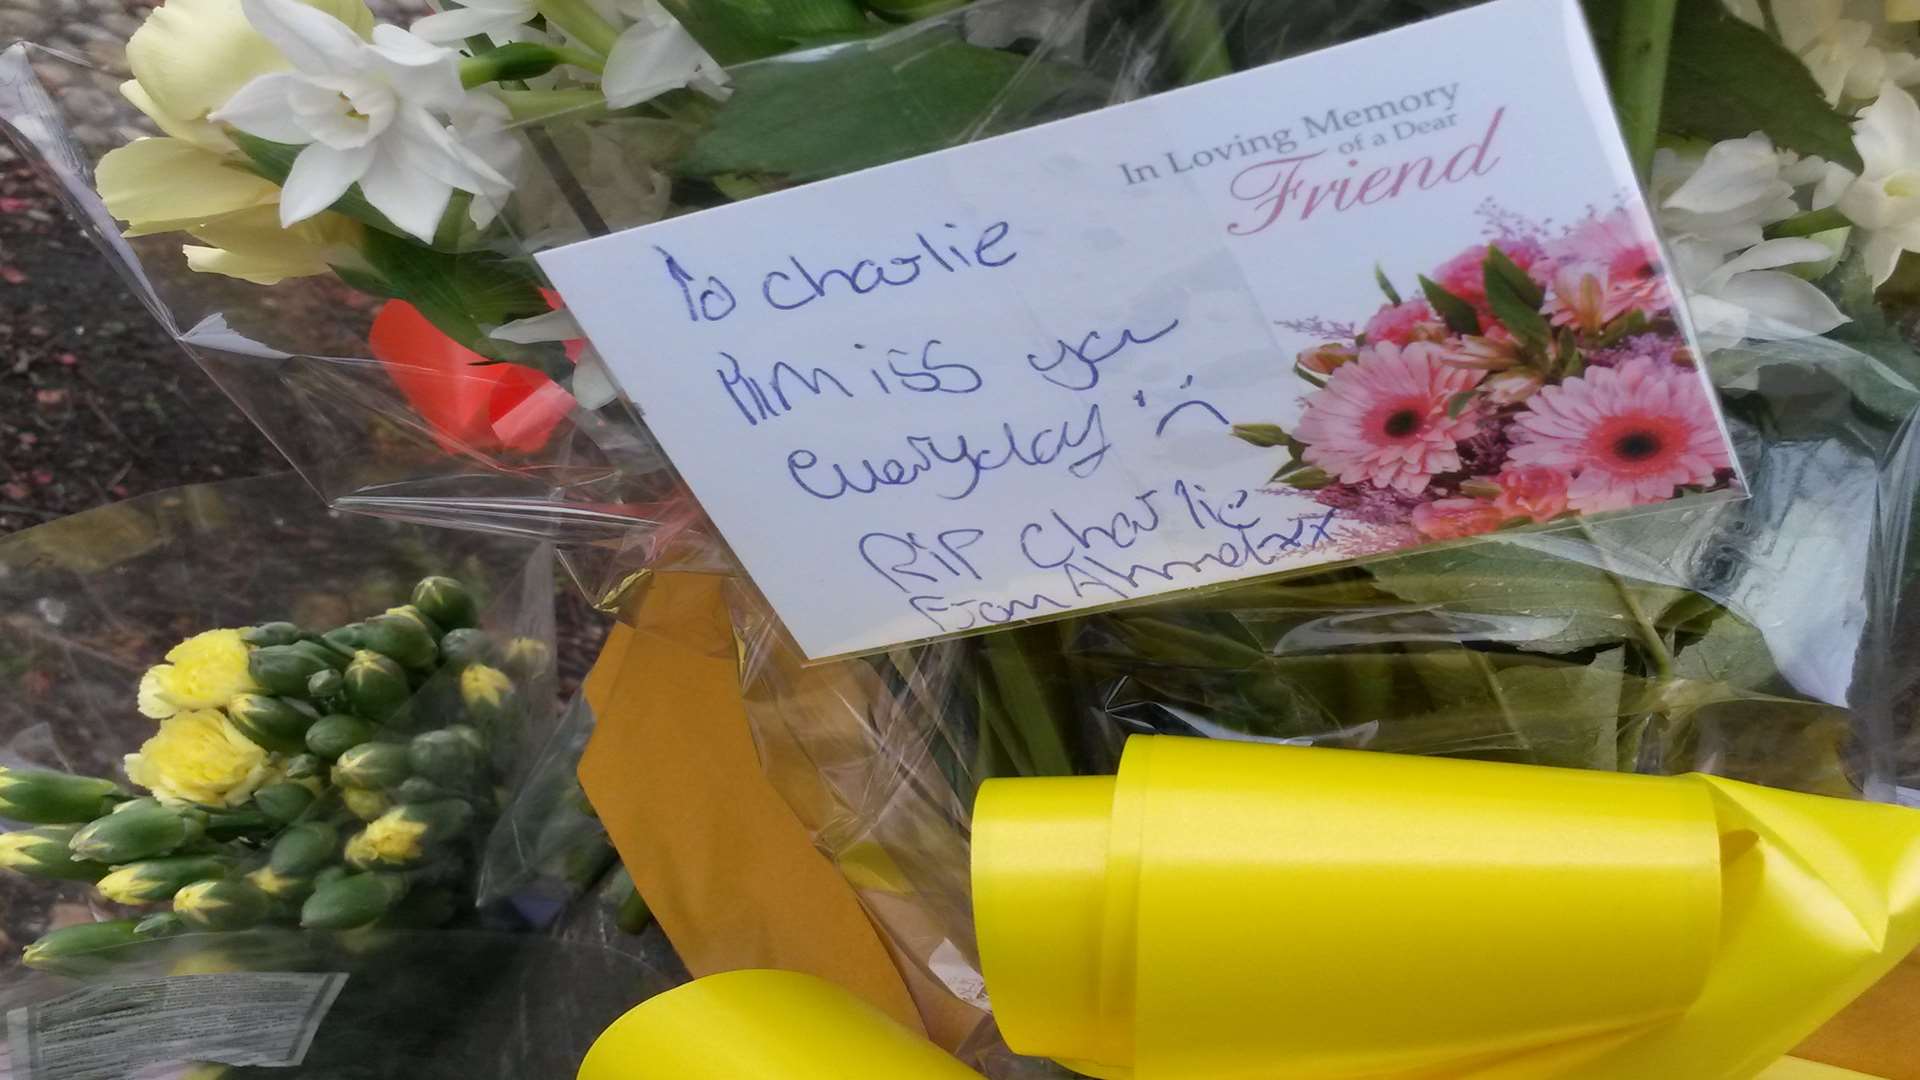 Flowers have been left for "Charlie"